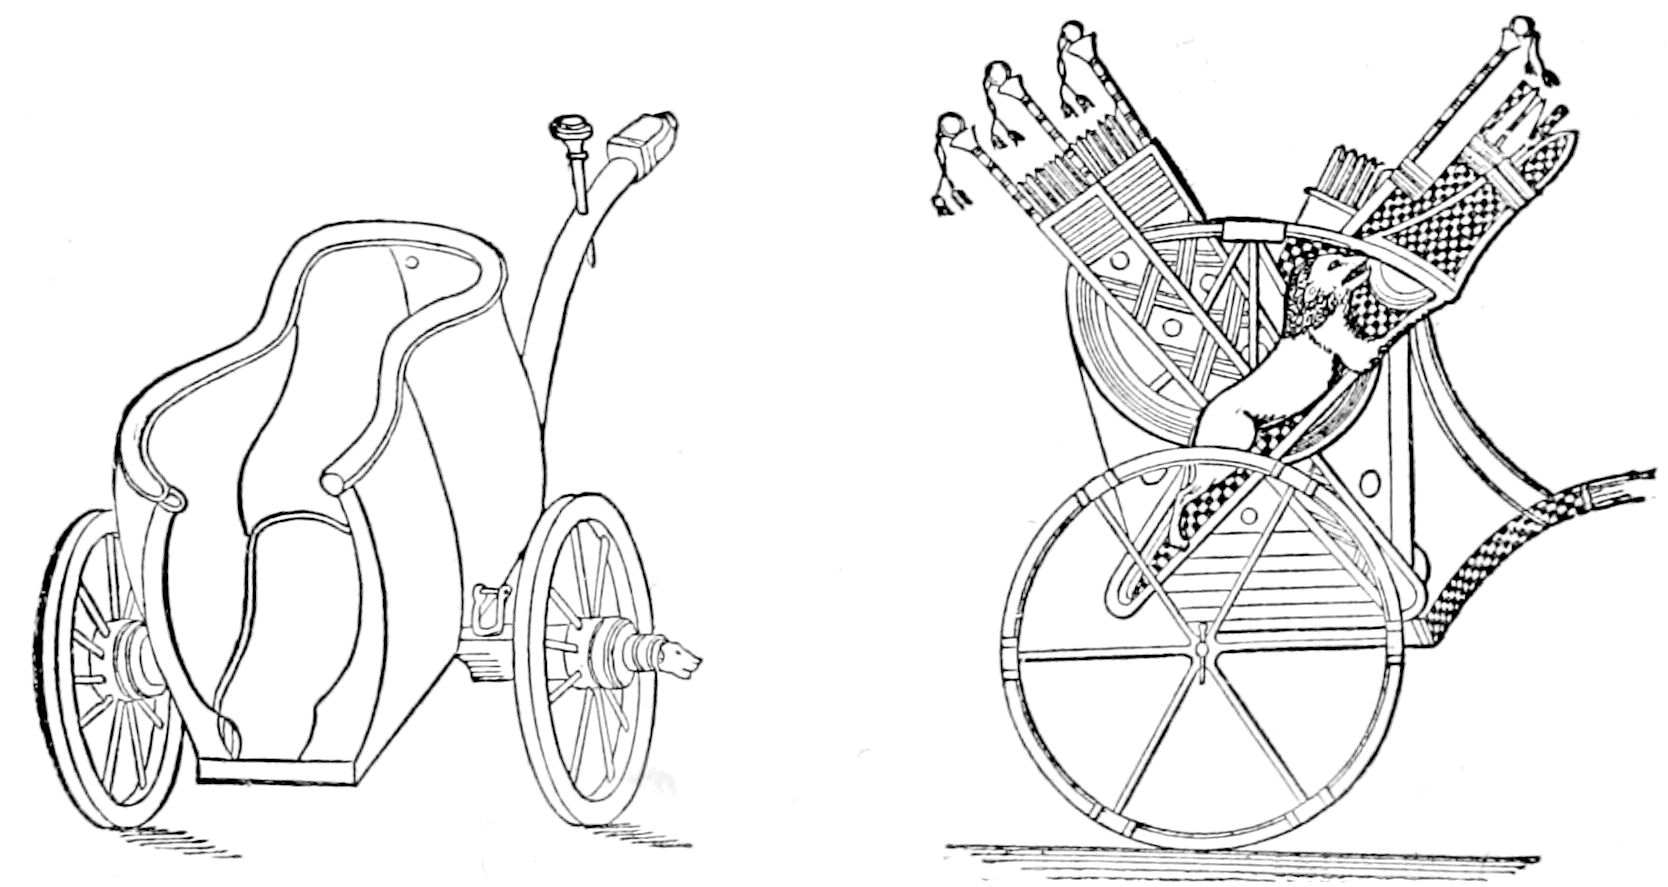 Two images of Egyptian Chariots